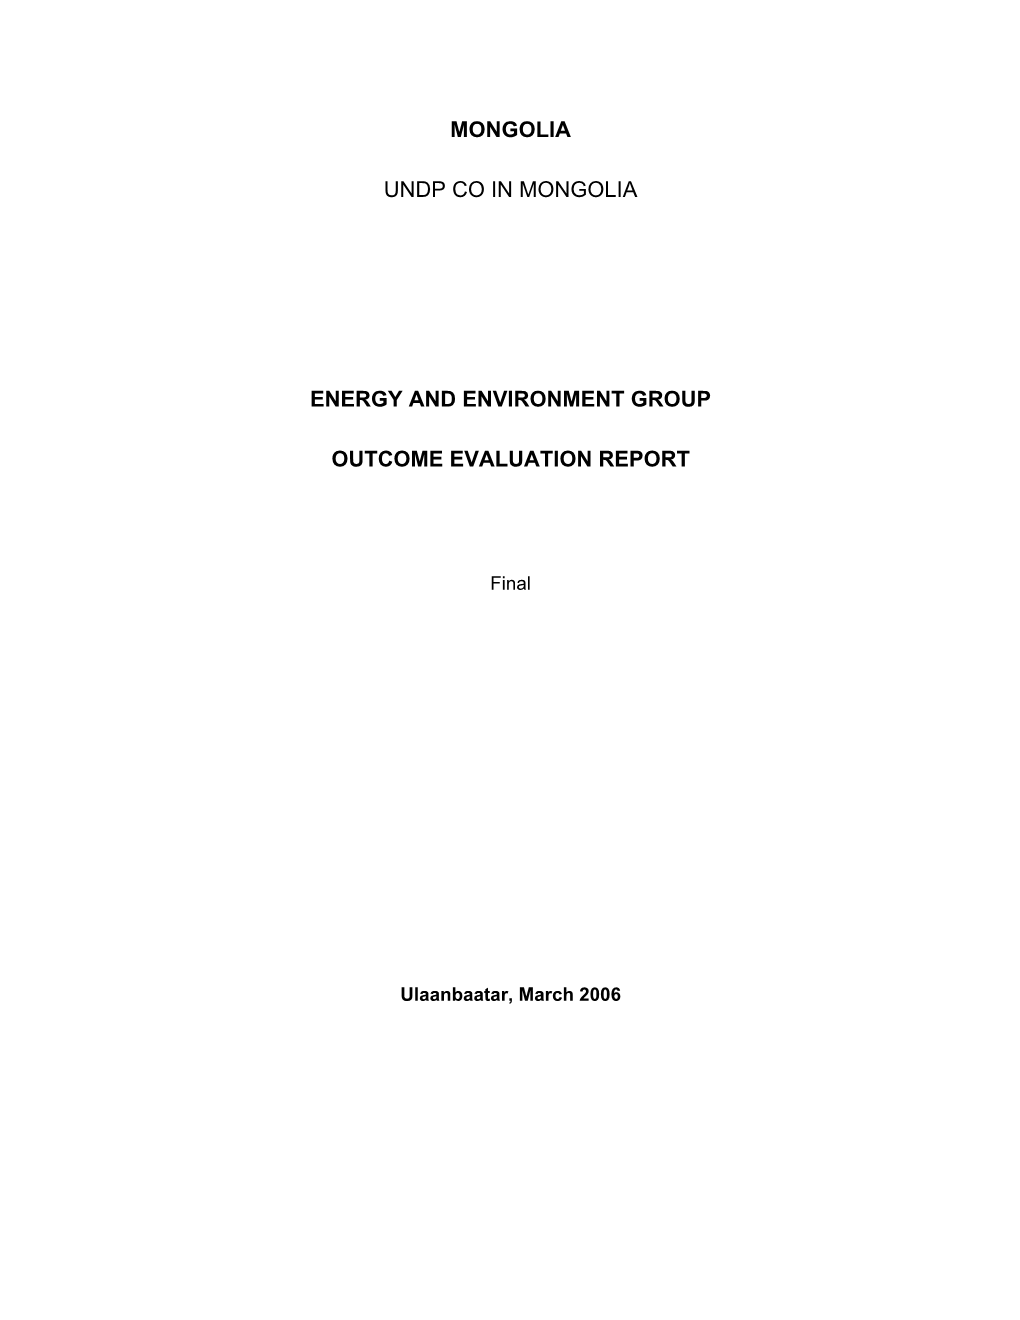 Mongolia Undp Co in Mongolia Energy and Environment Group Outcome